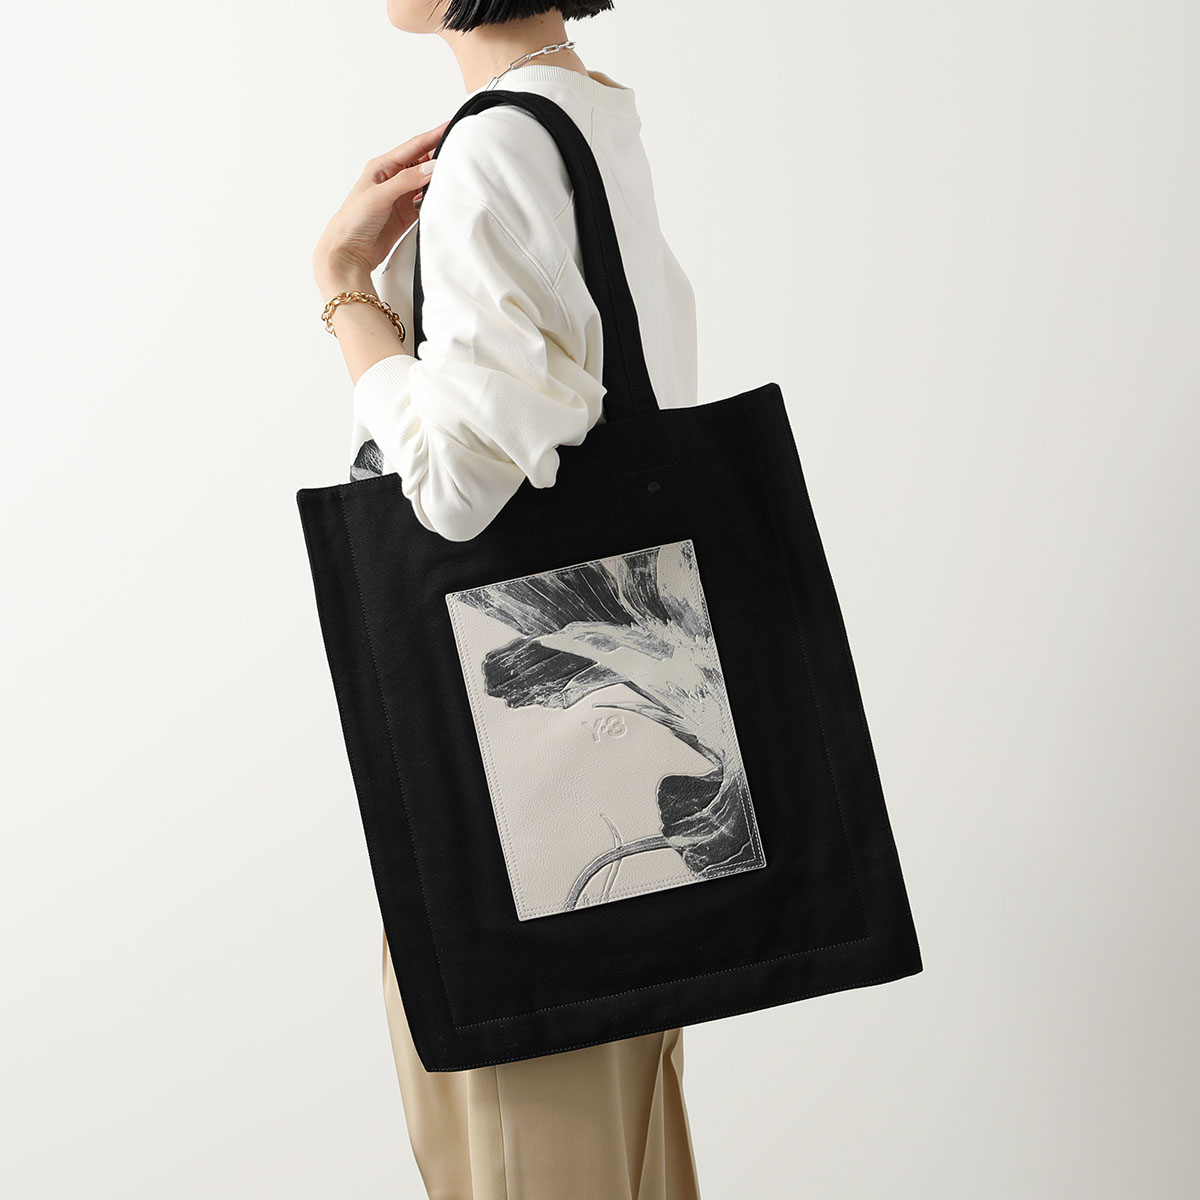 Y-3 ワイスリー トートバッグ FLORAL TOTE フローラル IN2408 レディース コッ...